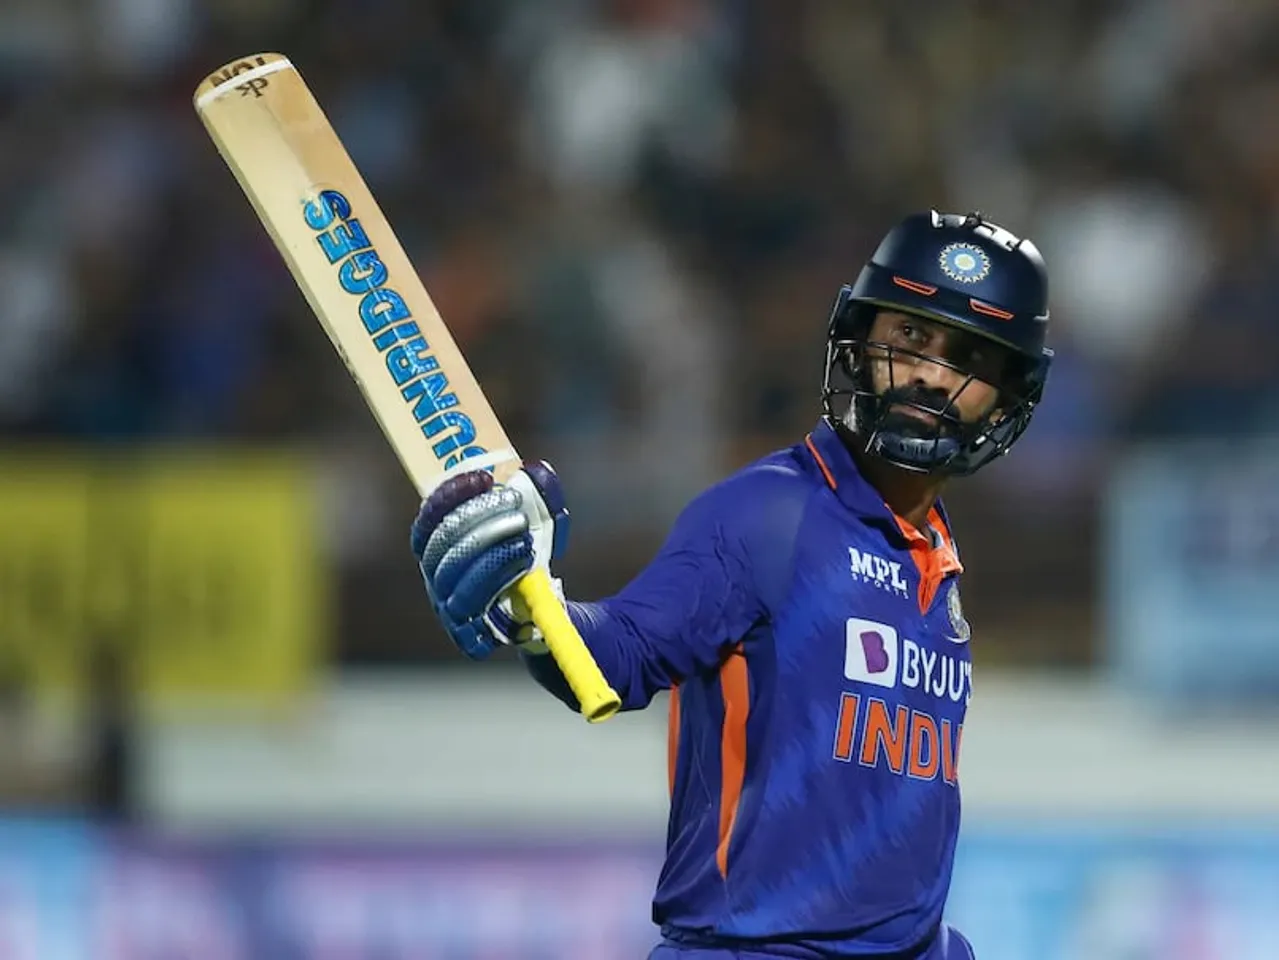 "This is one of the best team environments I have been in": Dinesh Karthik praises Rahul Dravid and Rohit Sharma | SportzPoint.com